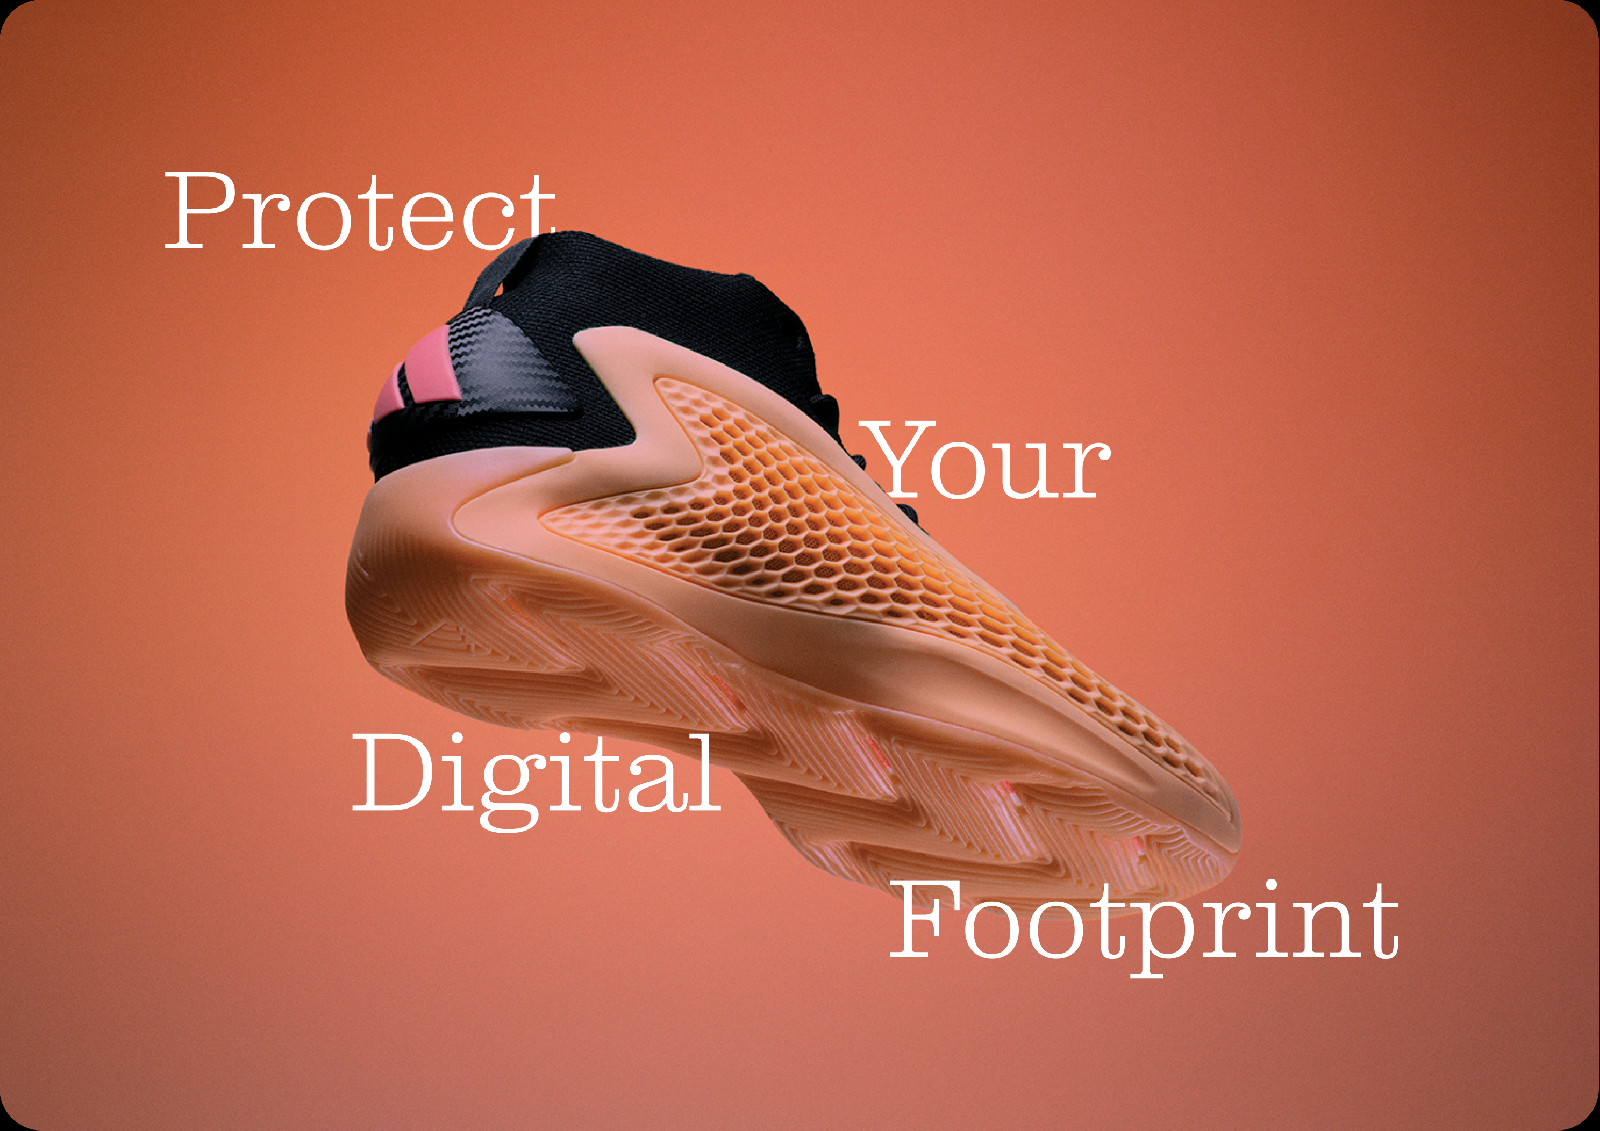 Protect Your Digital Footprint text around shoe